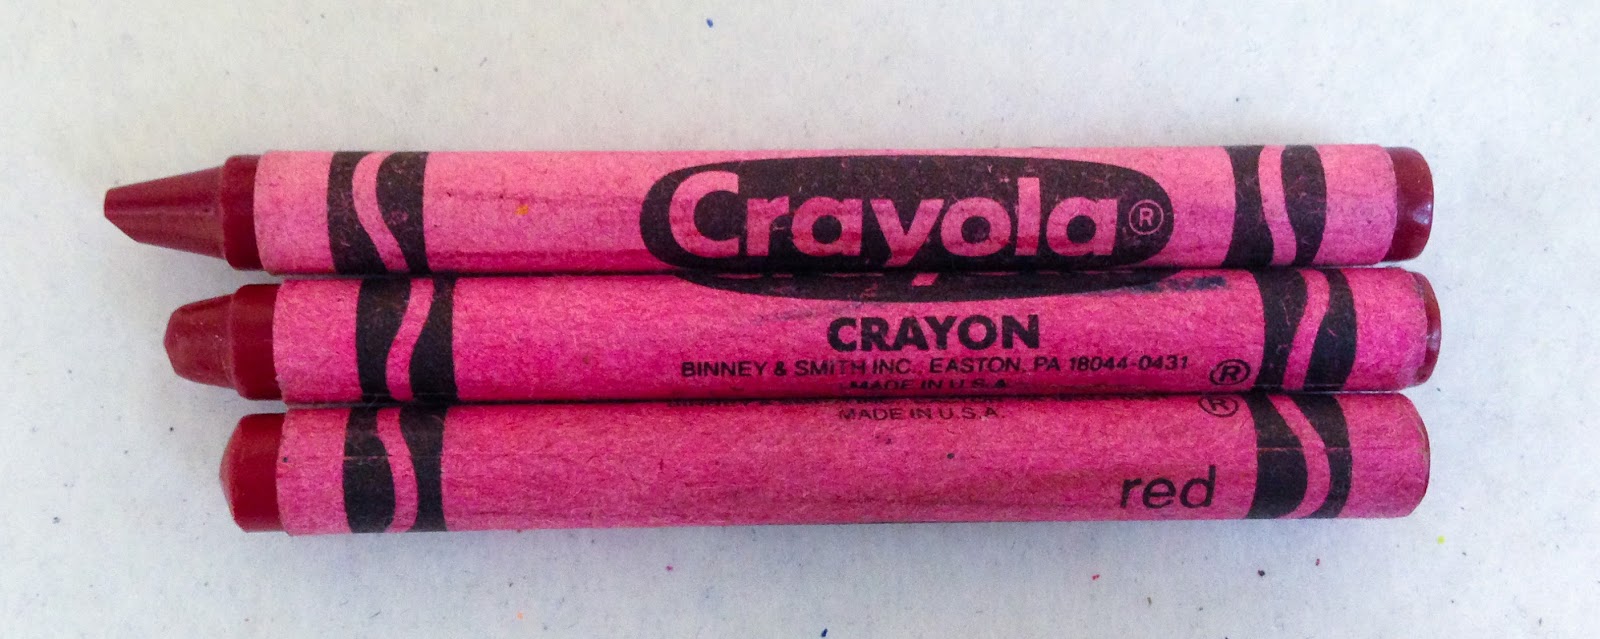 VERY RARE 96 Crayola Big Box of Crayons LIMITED EDITION “Name the New  Colors”